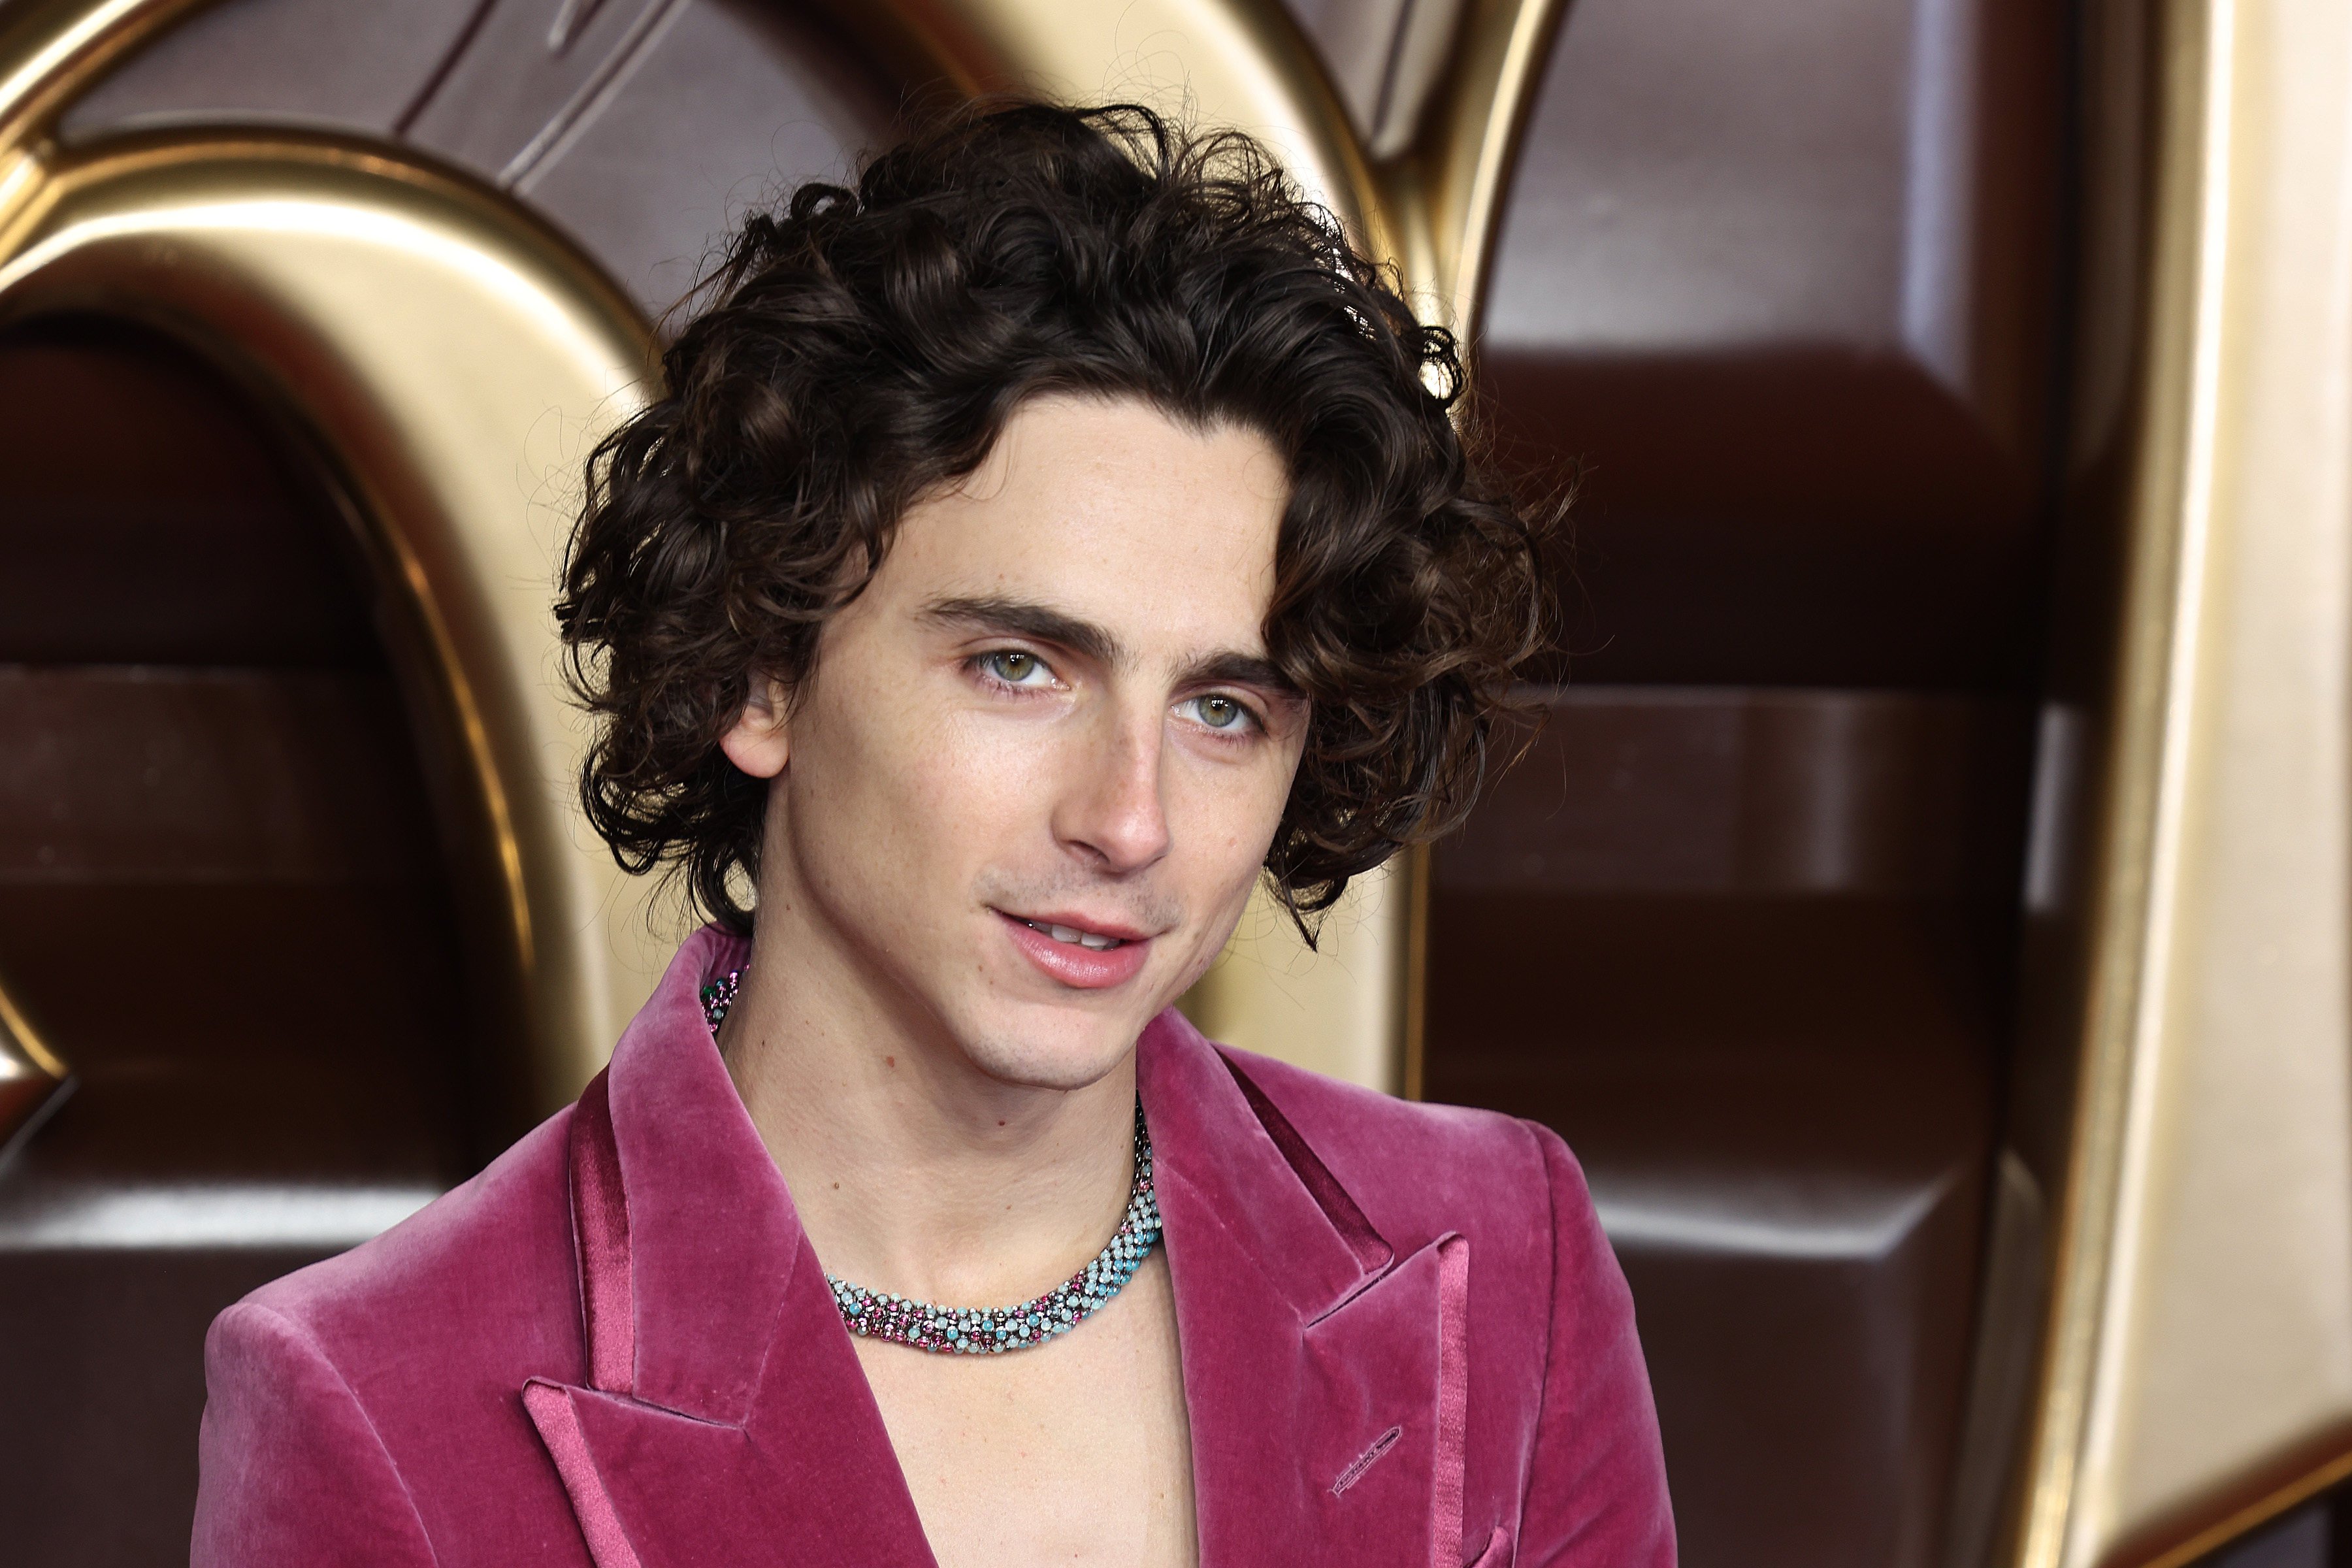 Timothée Chalamet wears candy-like Cartier jewellery at the world premiere for Wonka in London, in November. Photo: FilmMagic